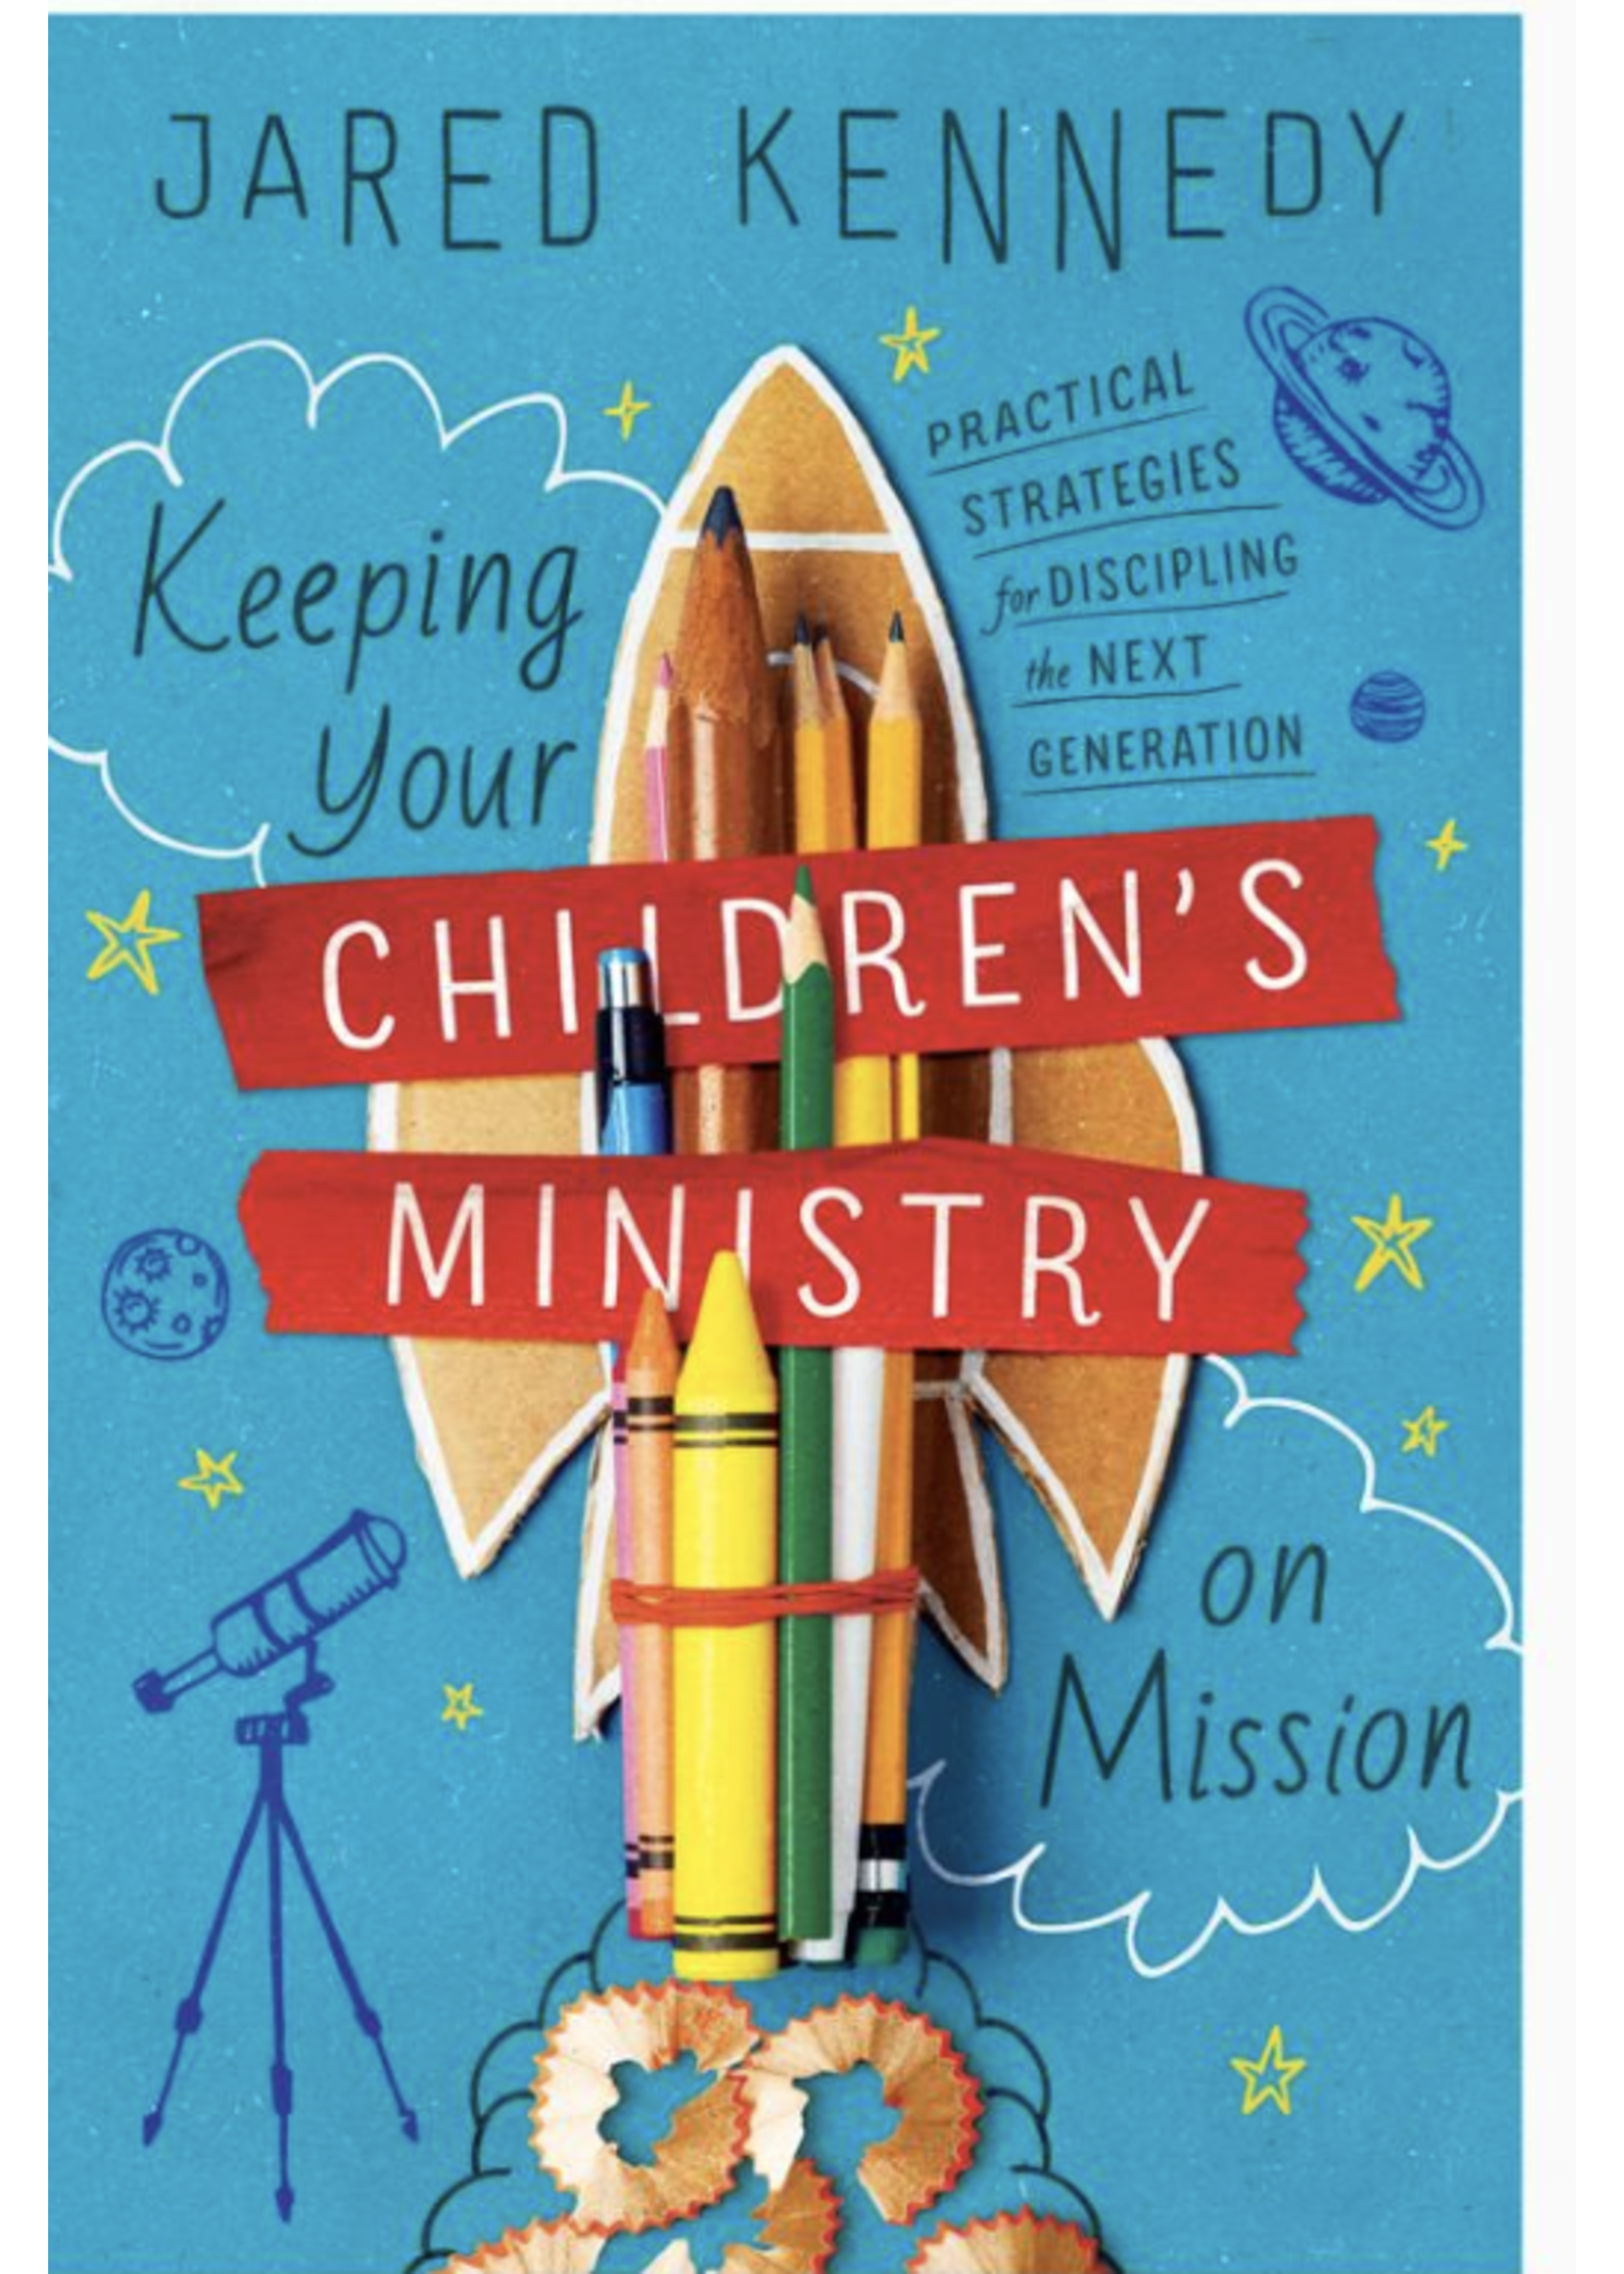 Keeping Your Children's Ministry on Mission: Practical Strategies for Discipling the Next Generation [Jared Kennedy]